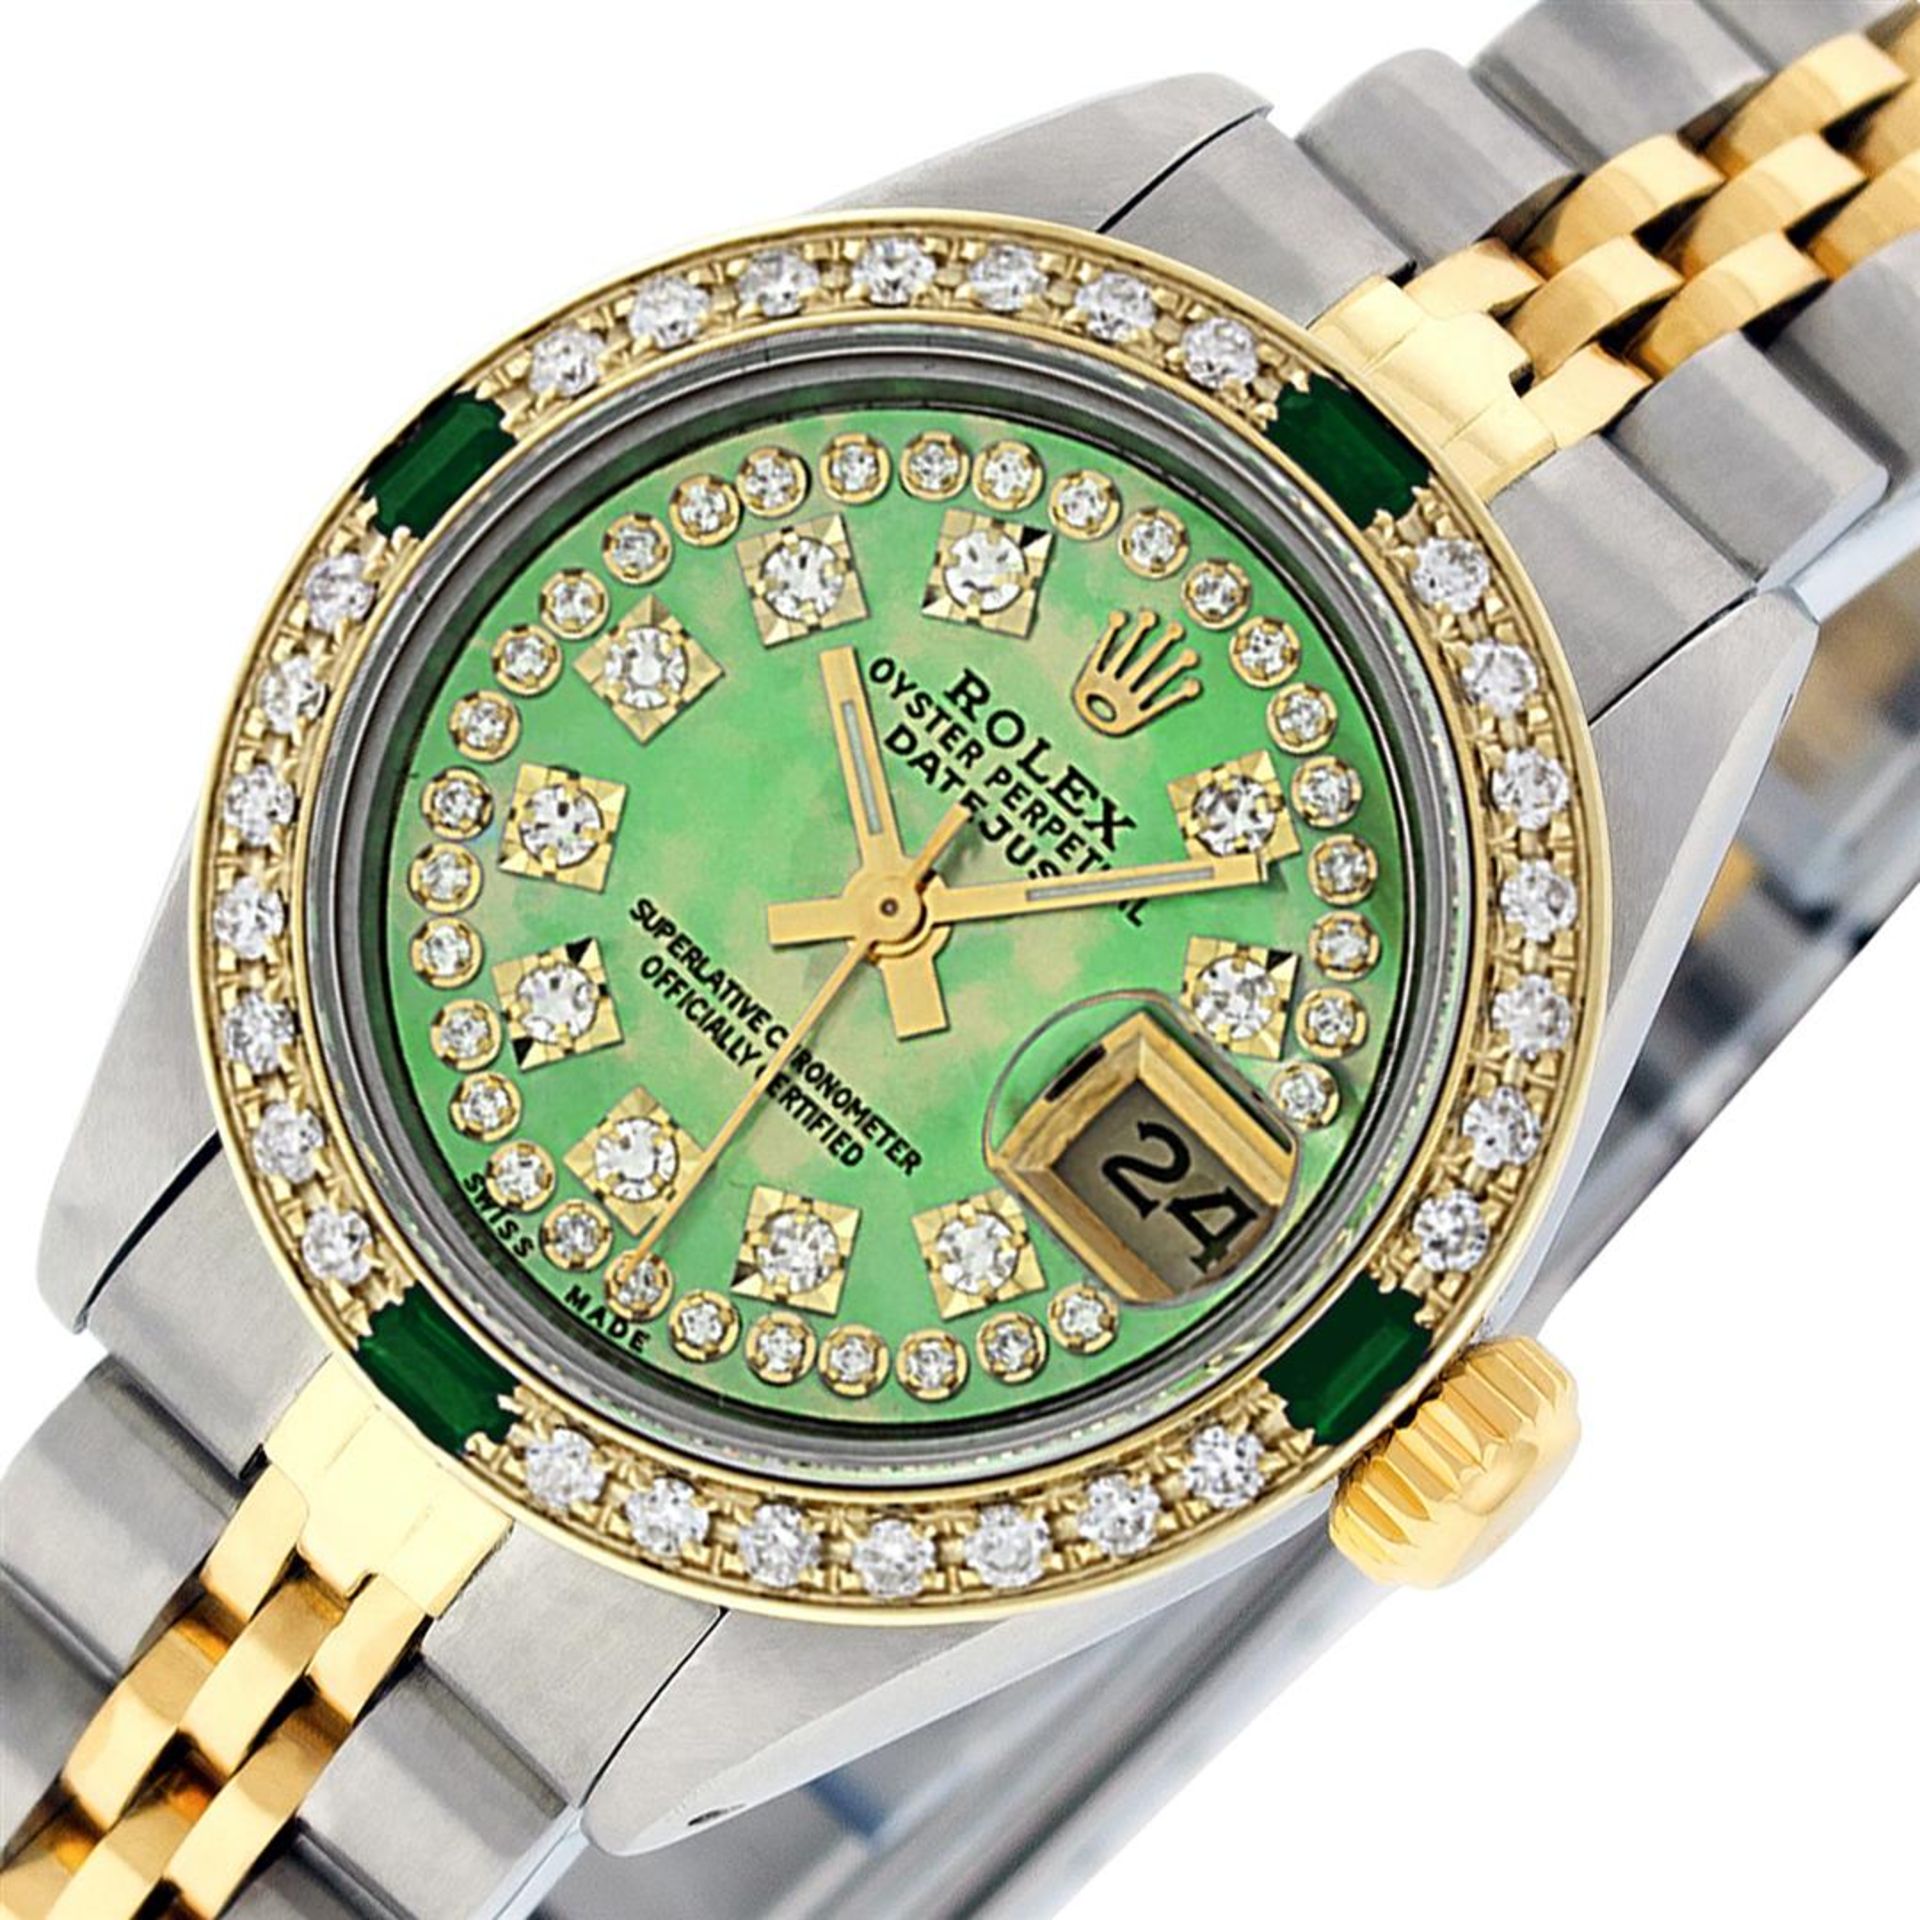 Rolex Ladies 26 Green String Diamond & Emerald Datejust Oyster Perpetual - Image 2 of 9